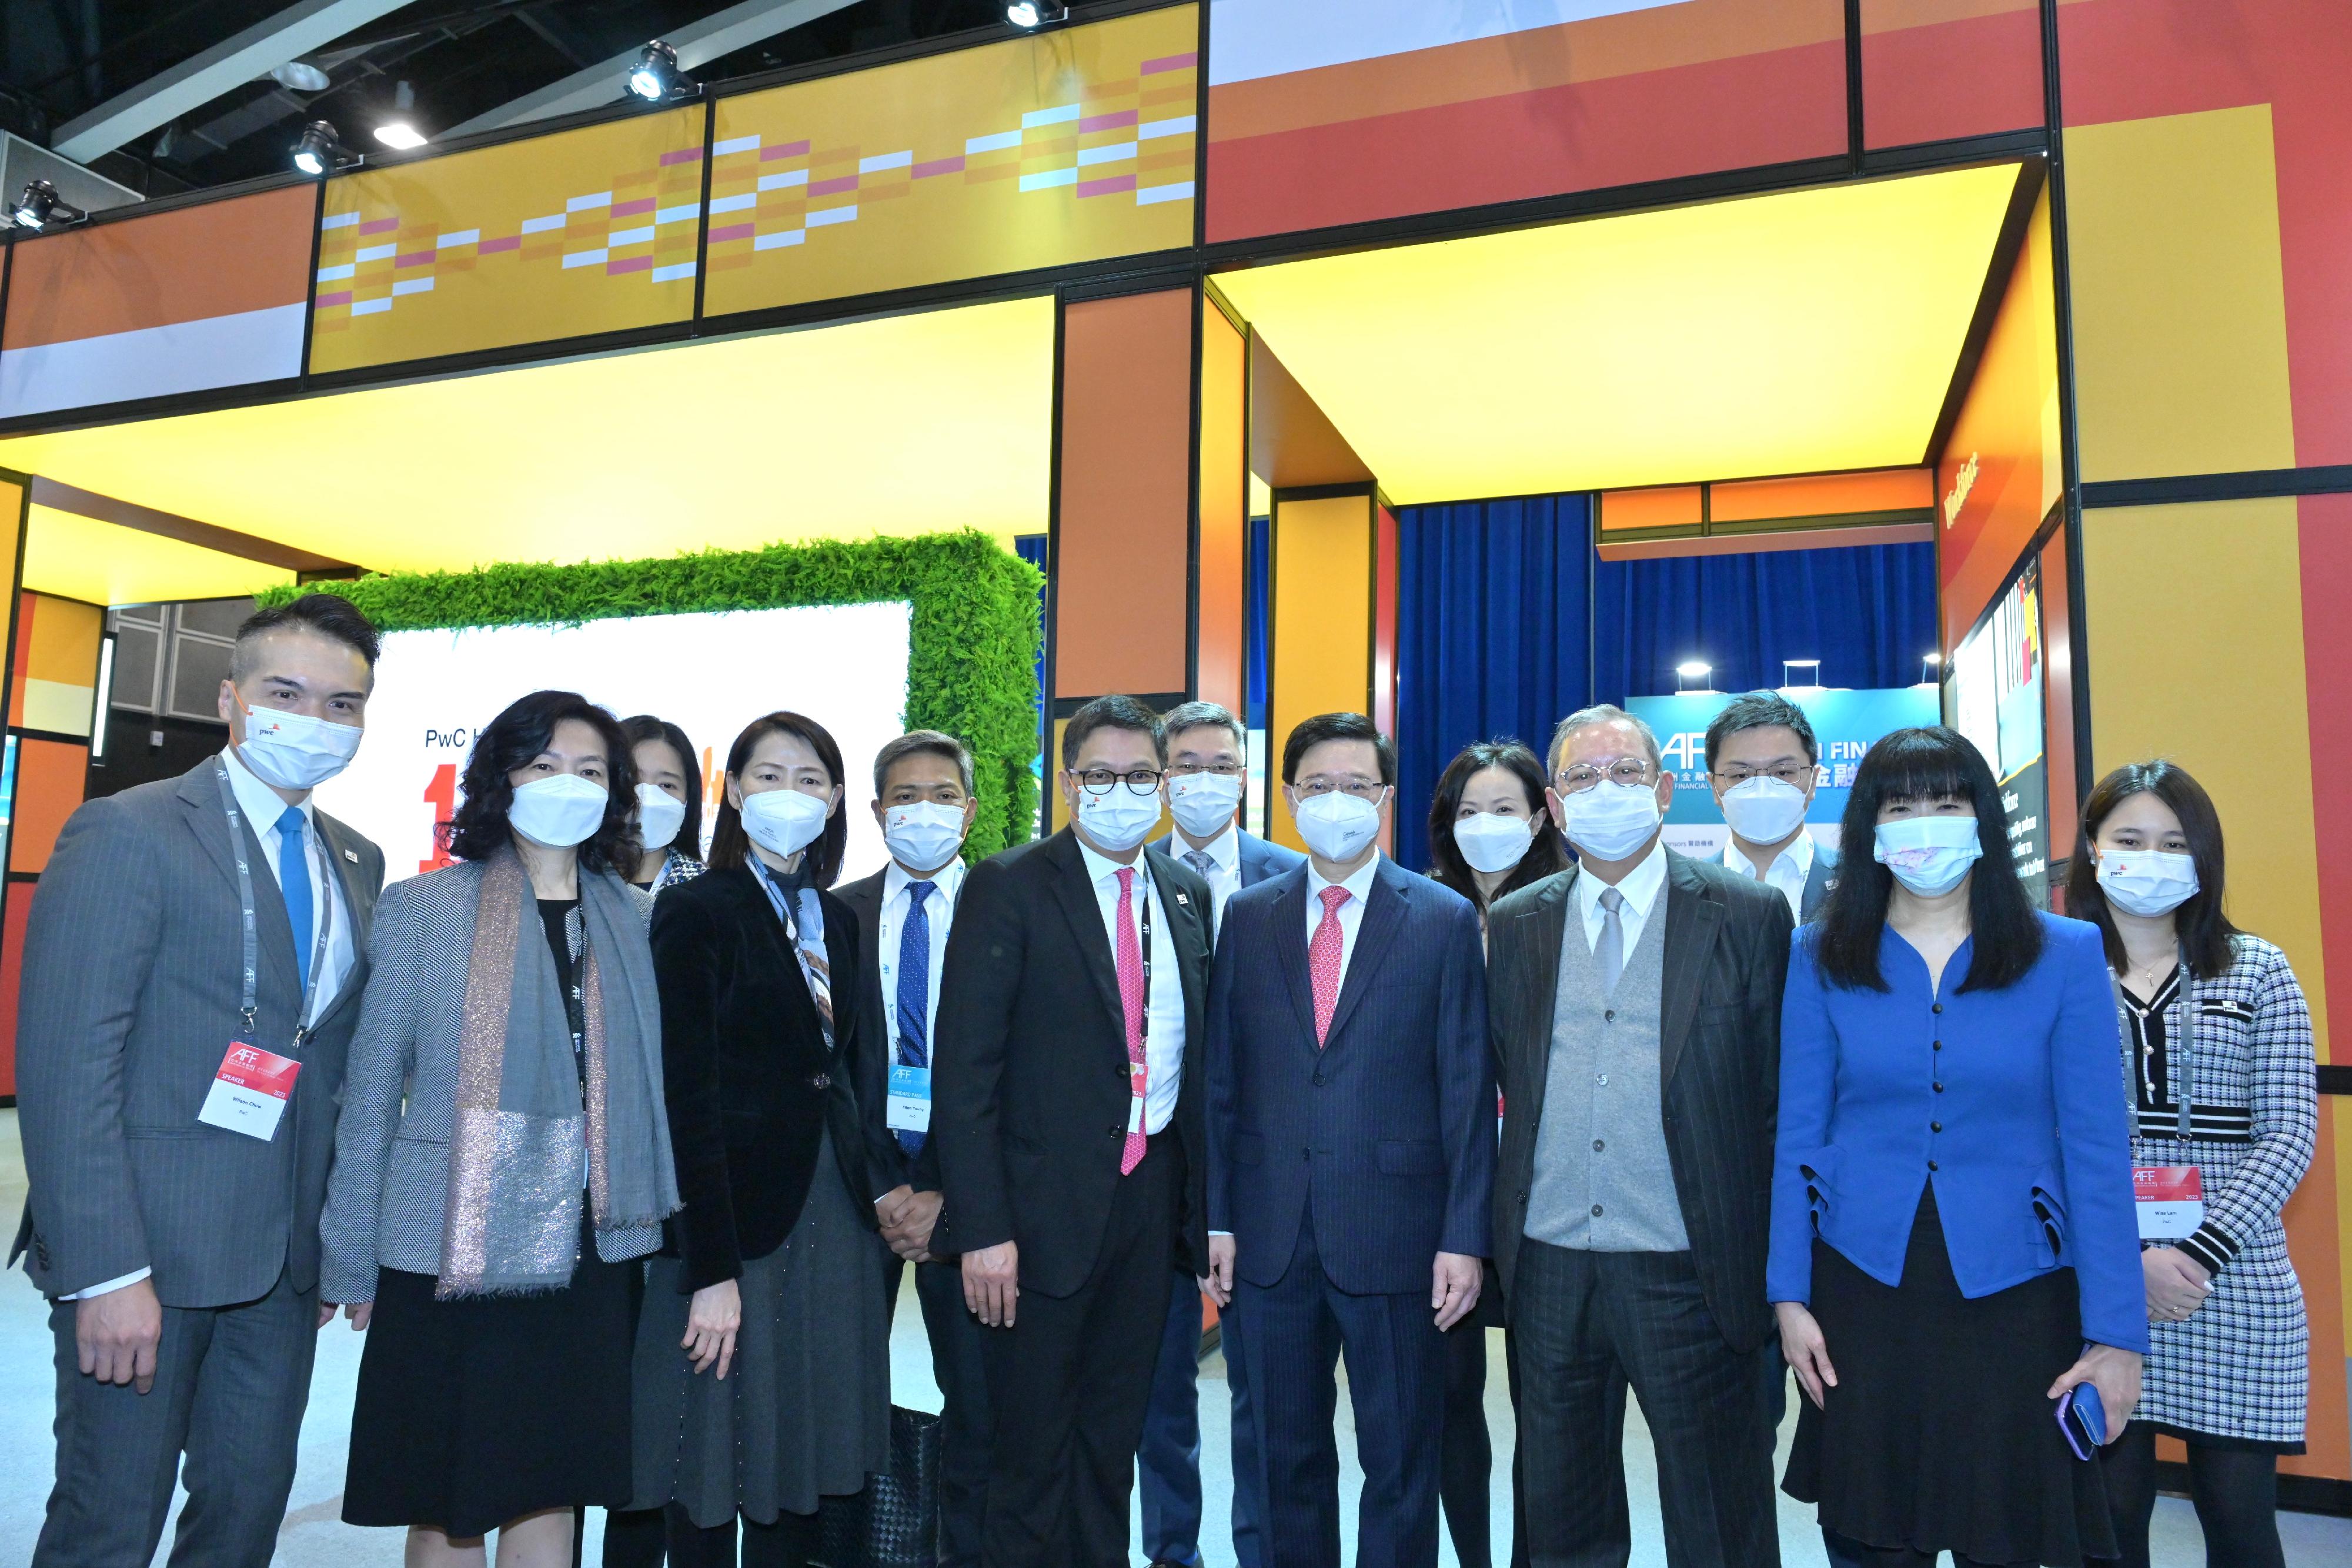 The Chief Executive, Mr John Lee, attended the Asian Financial Forum at the Hong Kong Convention and Exhibition Centre this morning (January 11). Photo shows Mr Lee (front row, third right), with other guests at the exhibition booths.